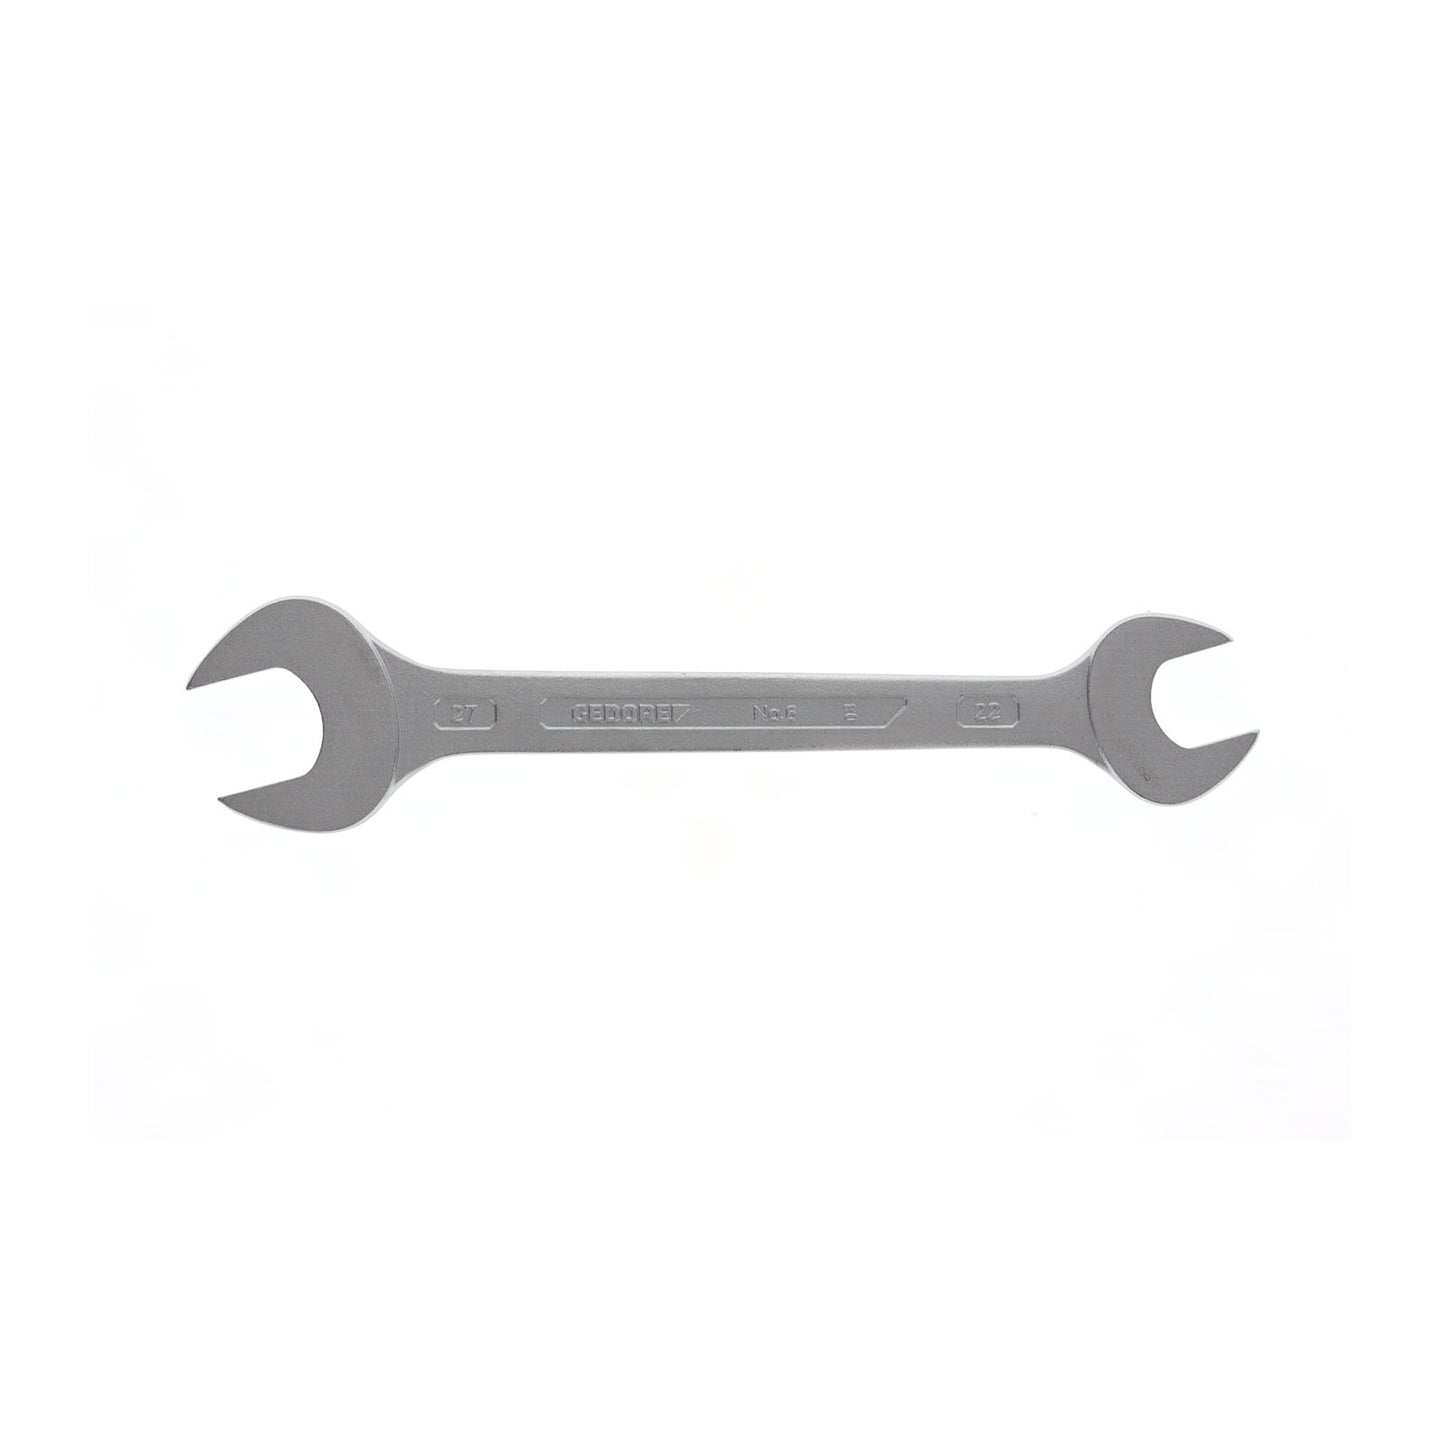 GEDORE 6 22X27 - 2-Mount Fixed Wrench, 22x27 (6067230)